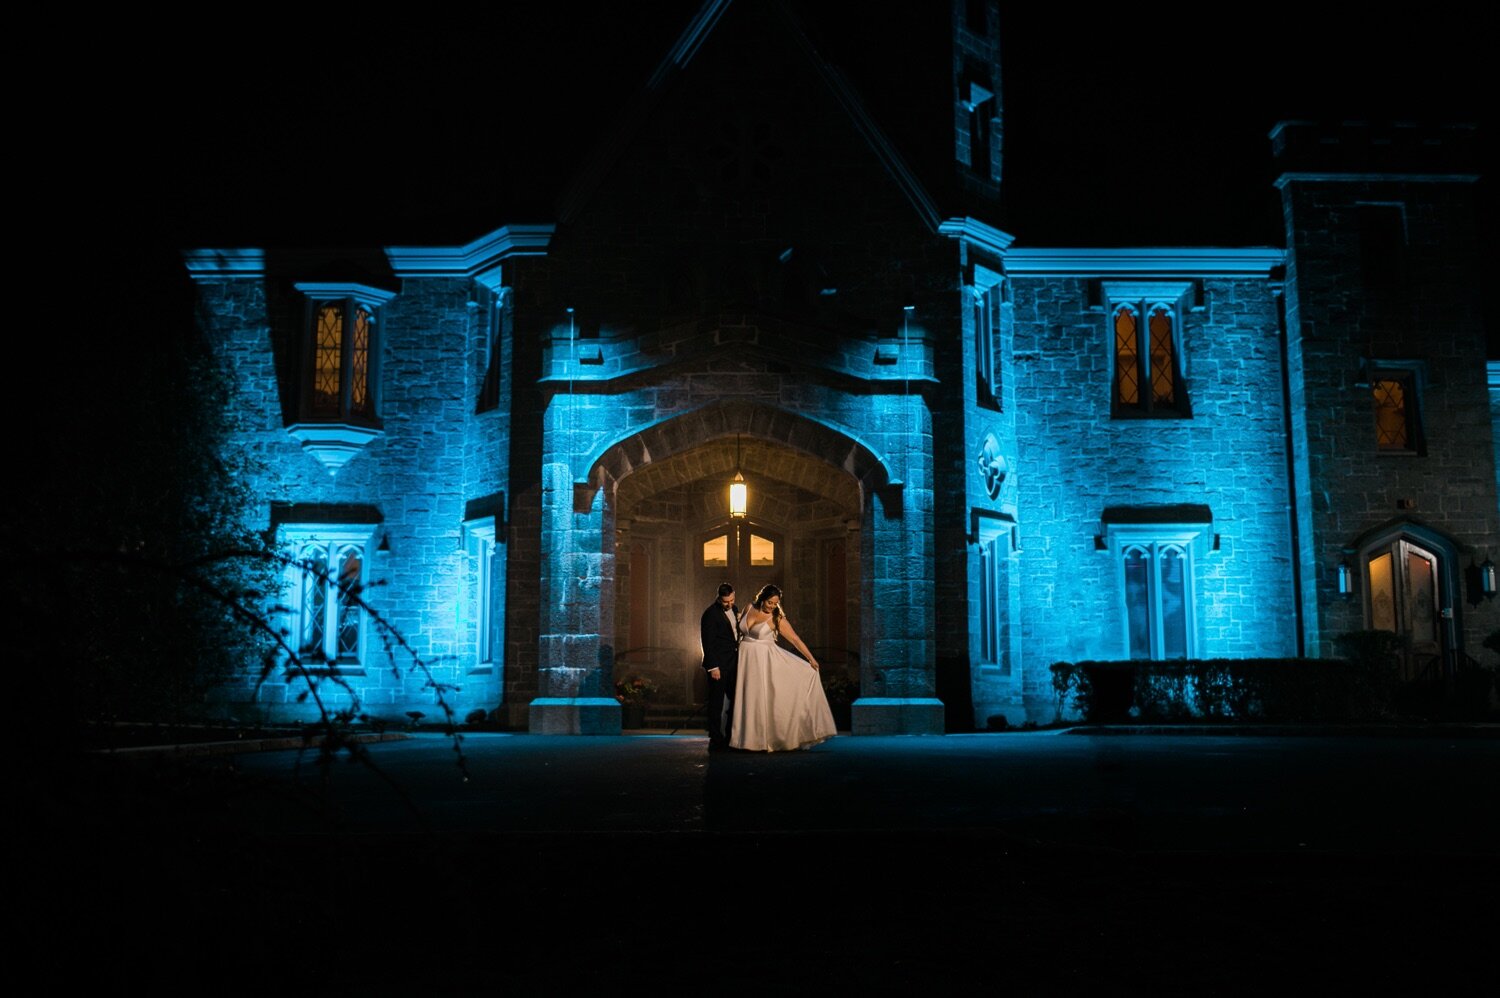 68_Outdoor night portraits at Whitby Castle wedding in Rye, NY.jpg